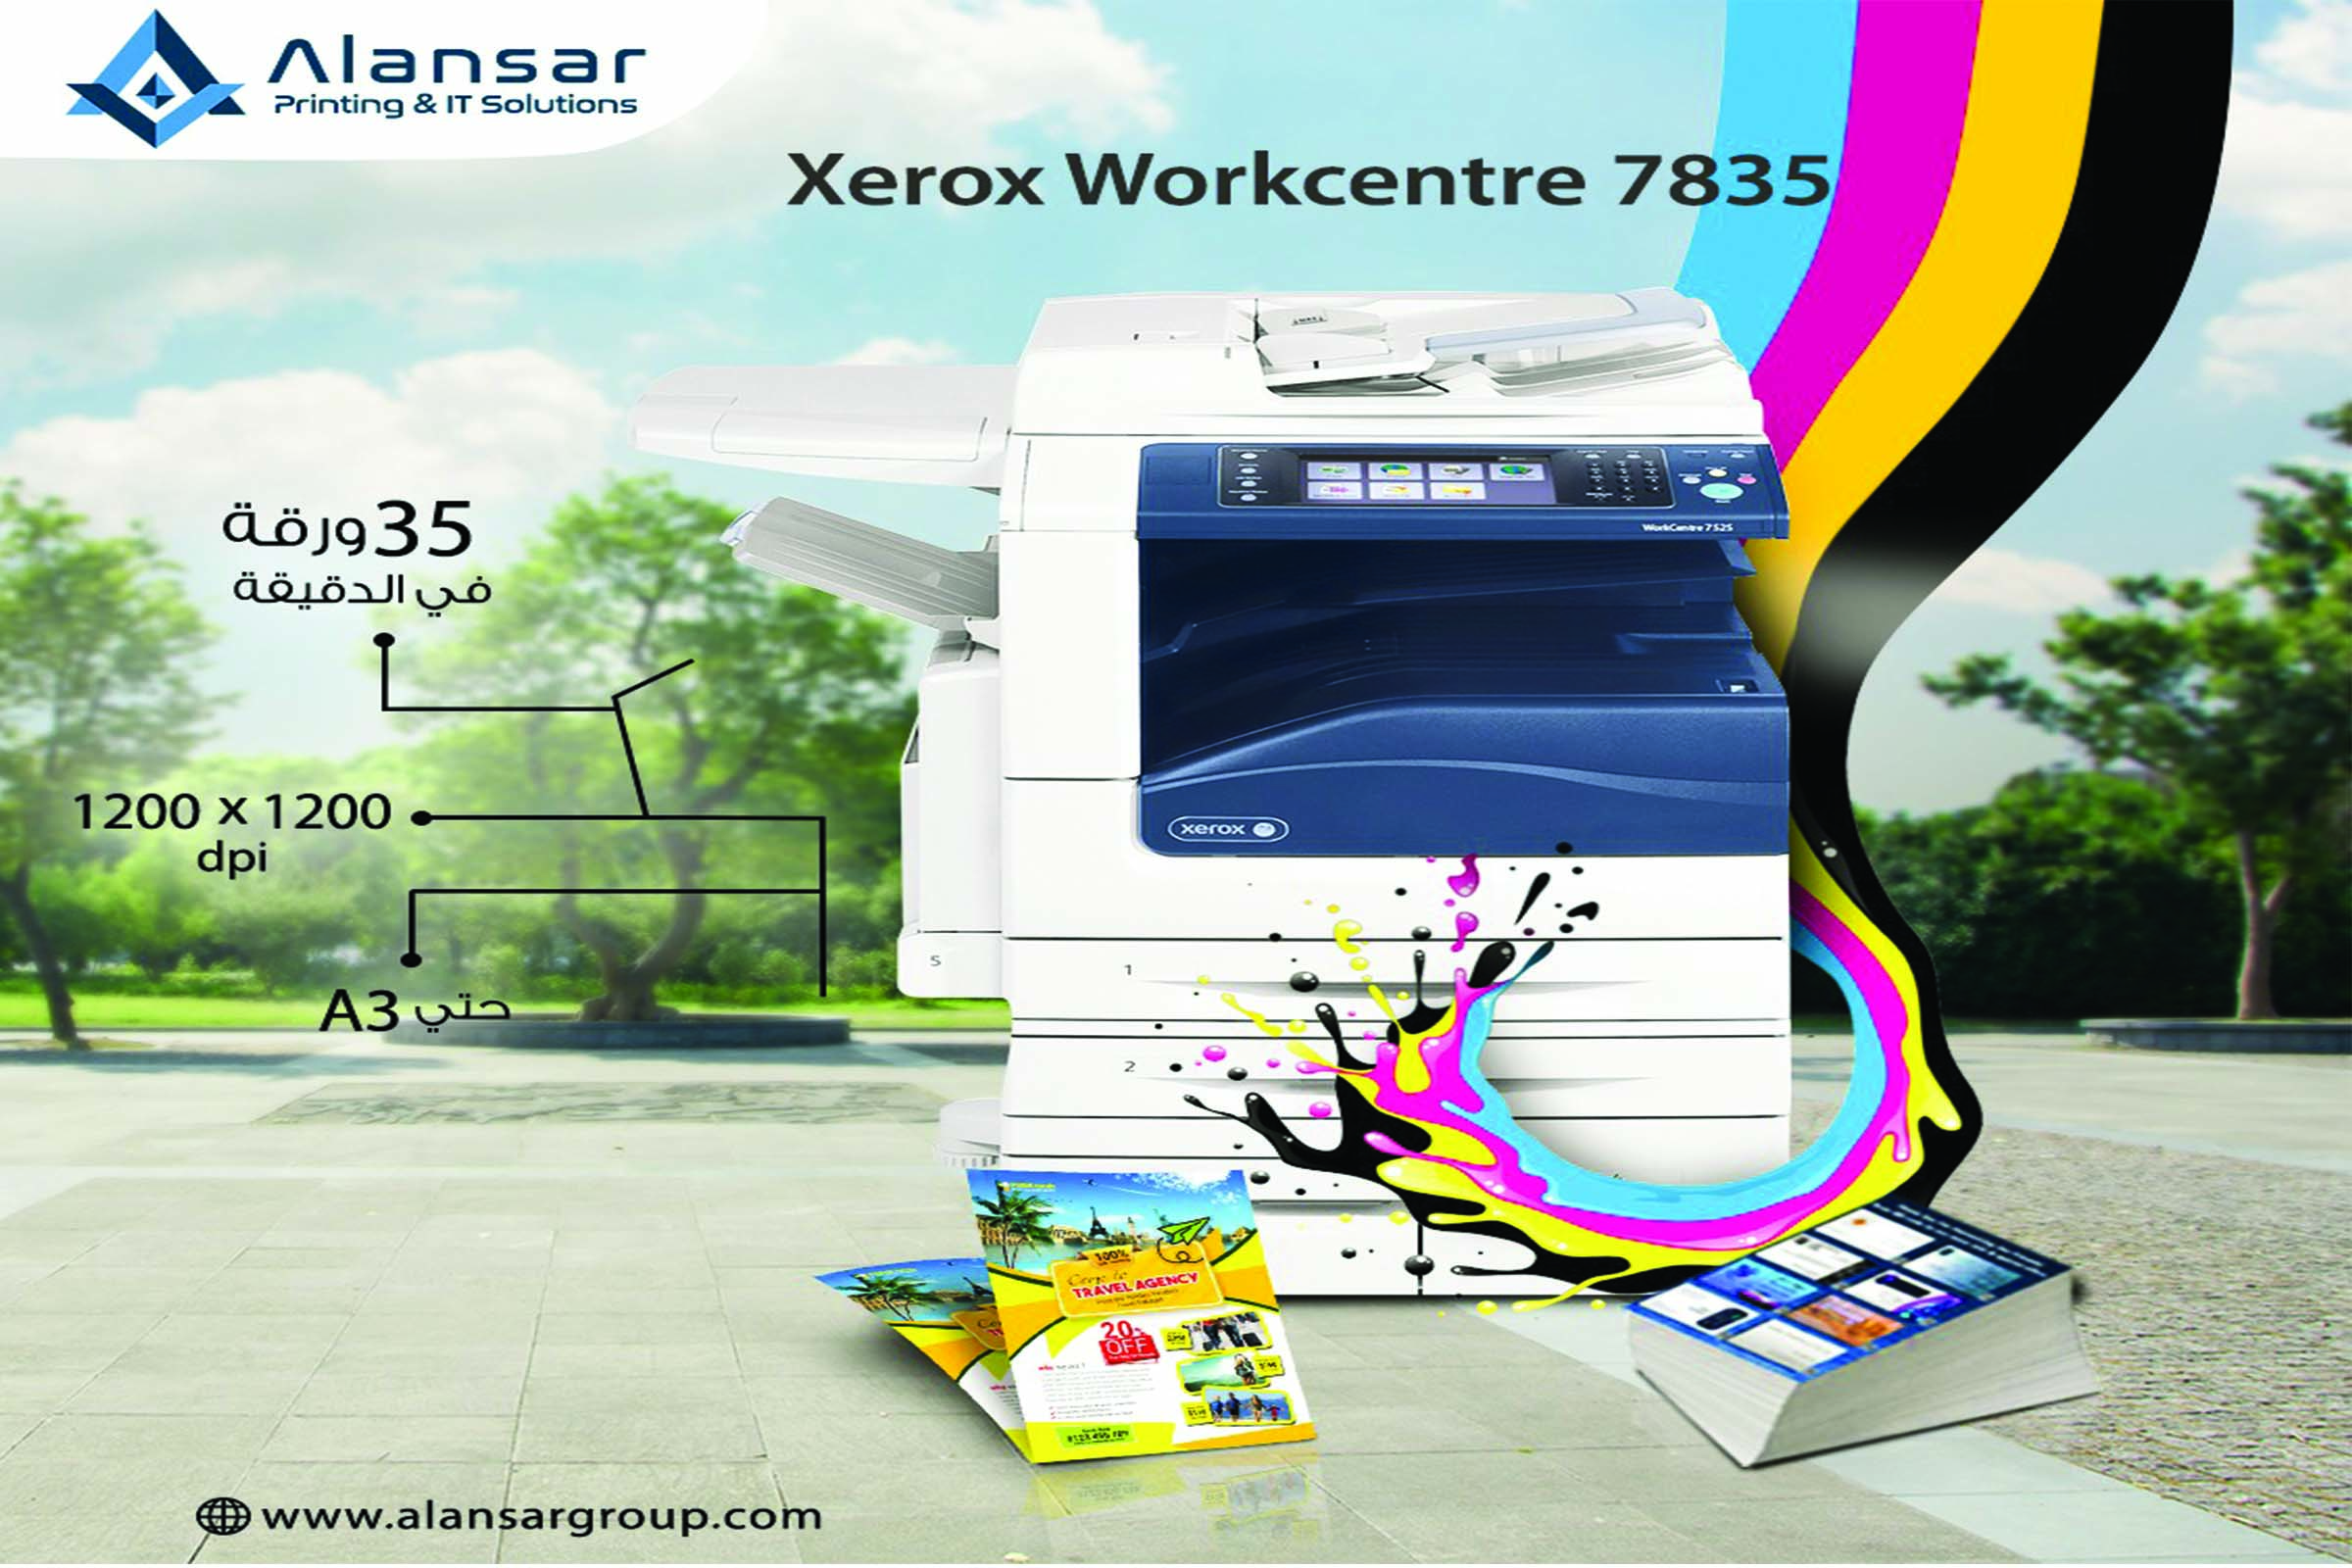 Xerox workcentre 7835 document printer delivers superior quality